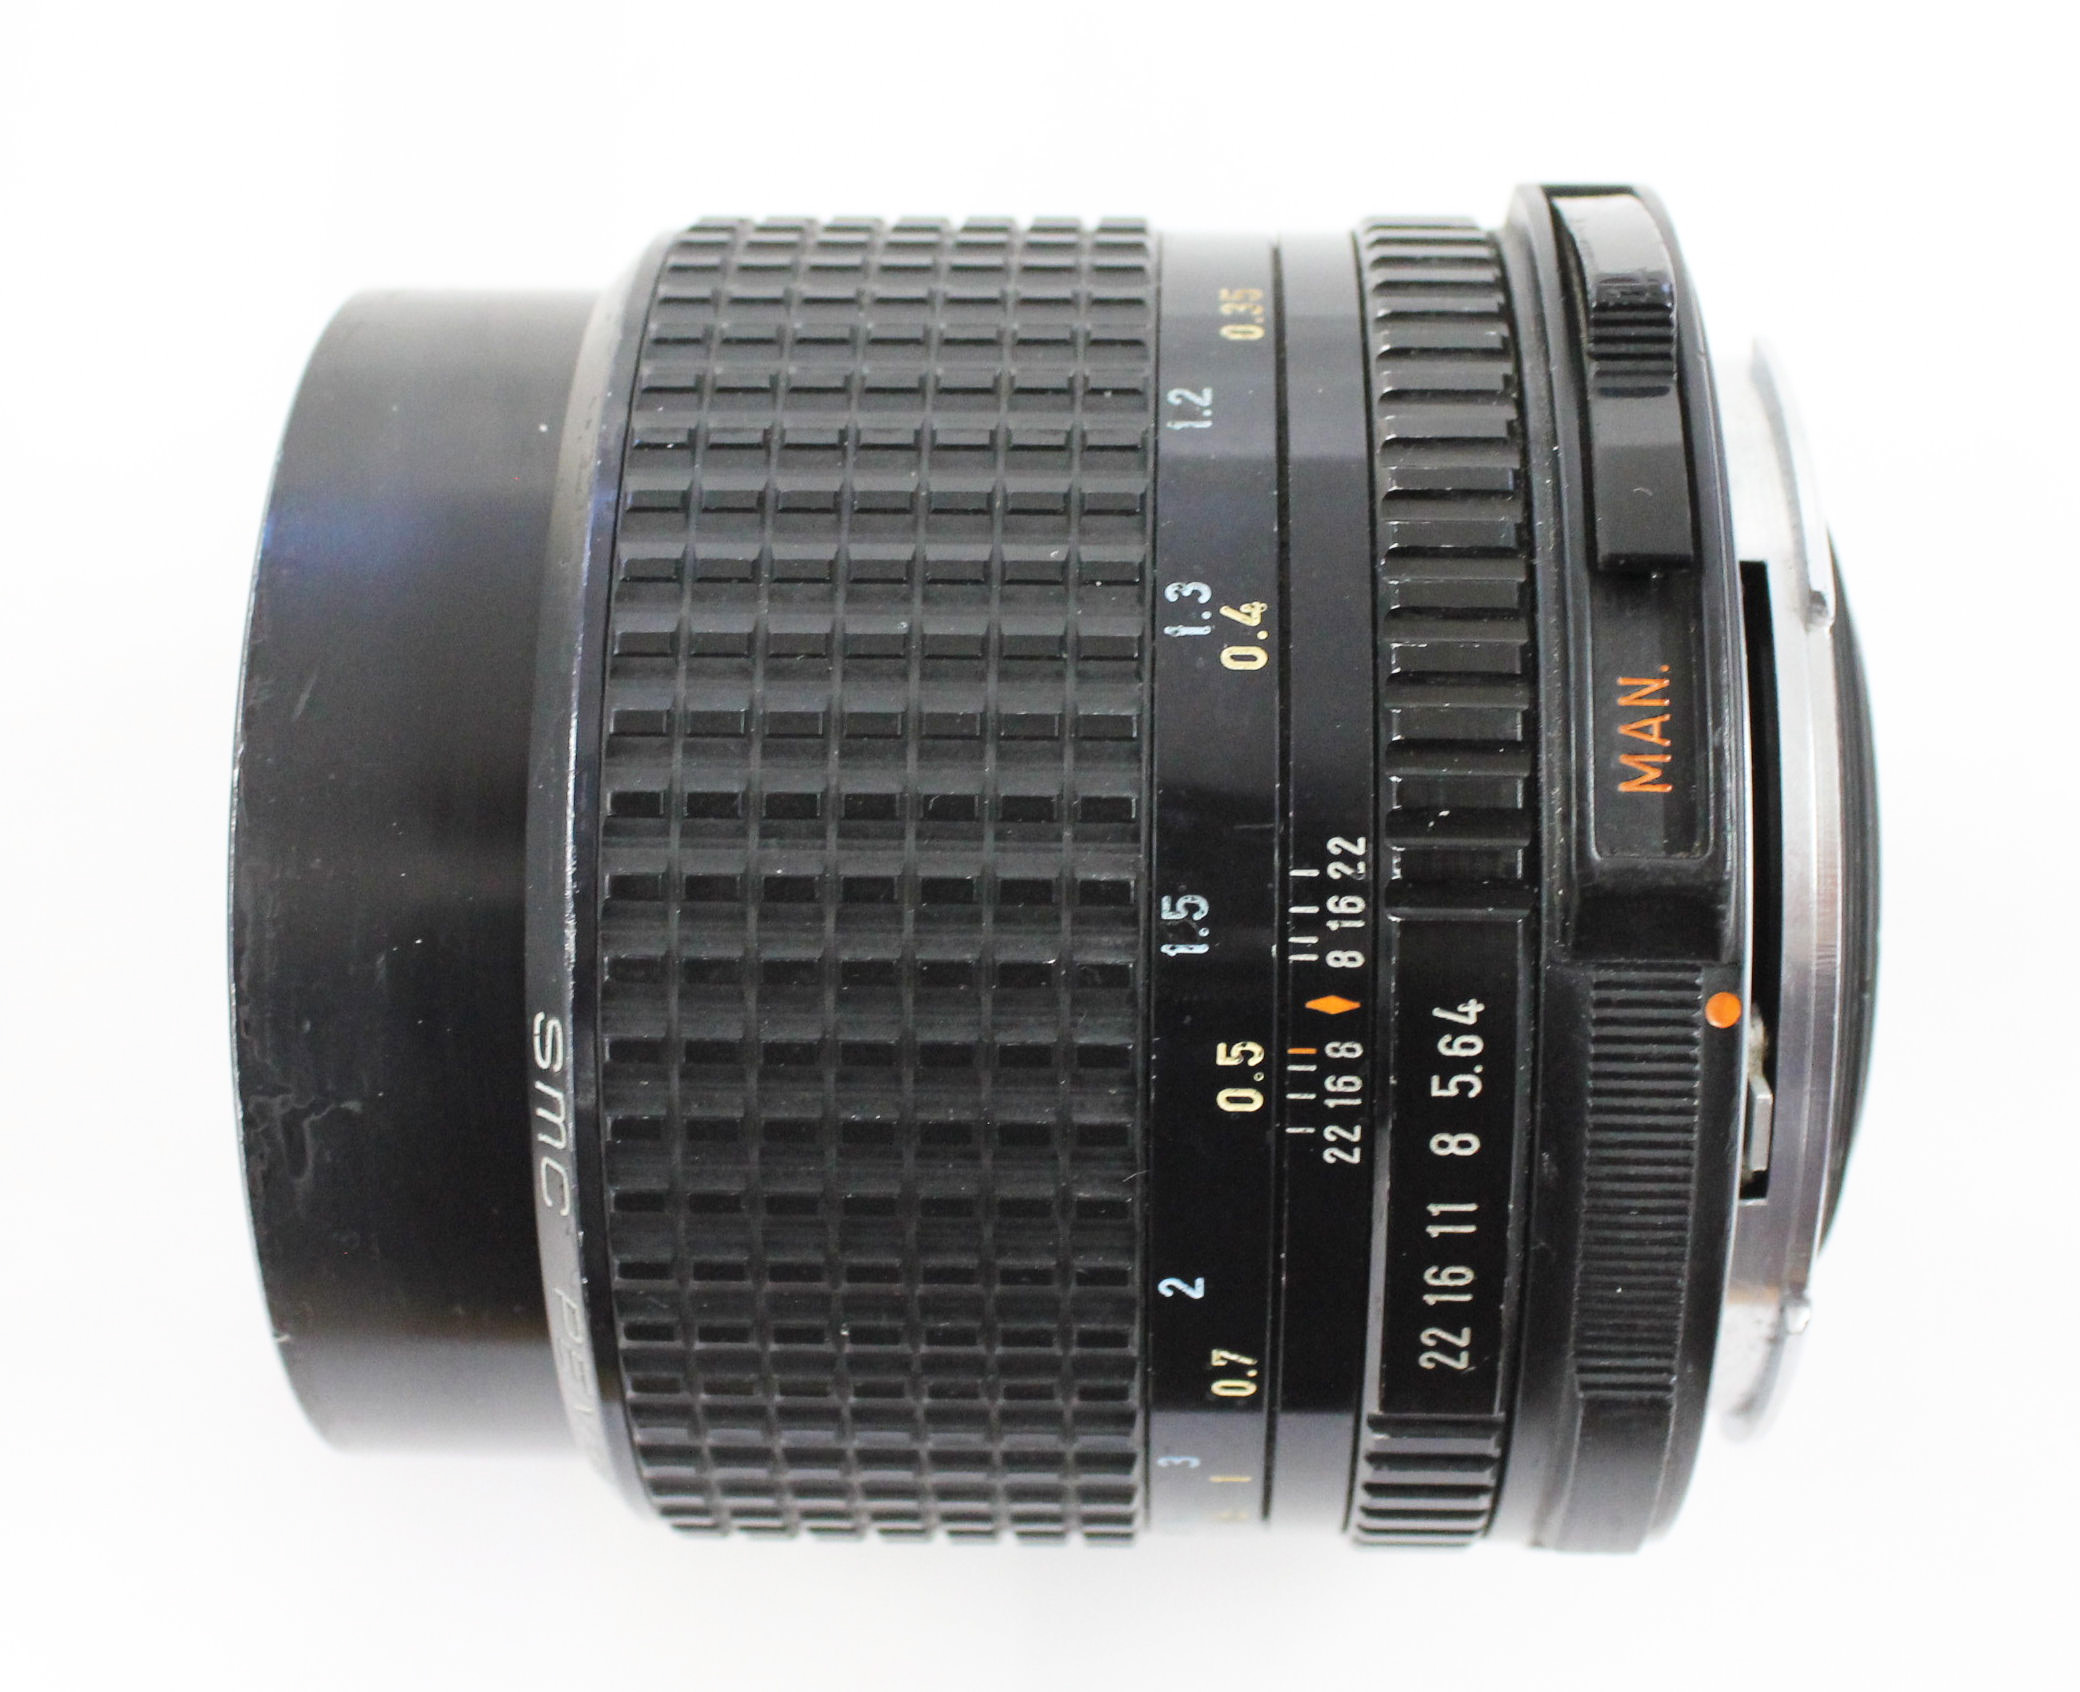  SMC Pentax 67 55mm F/4 Lens for Pentax 67 67II from Japan Photo 5